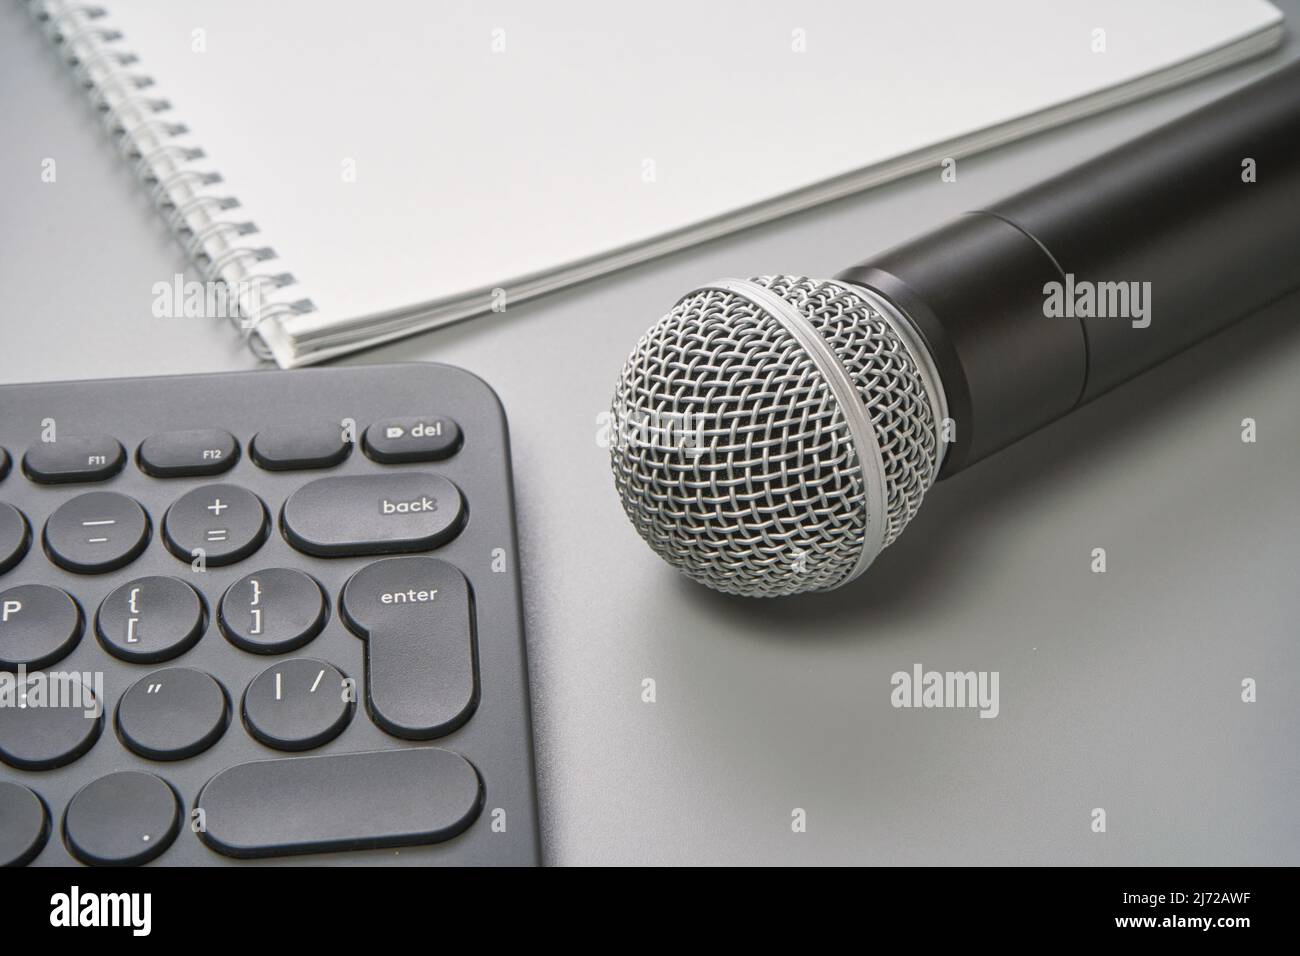 Podcast concept. White notebook with blank sheet. Black microphone, notebook and keyboard. Audiobook and podcasting. Audio technology. Home school teaching Stock Photo